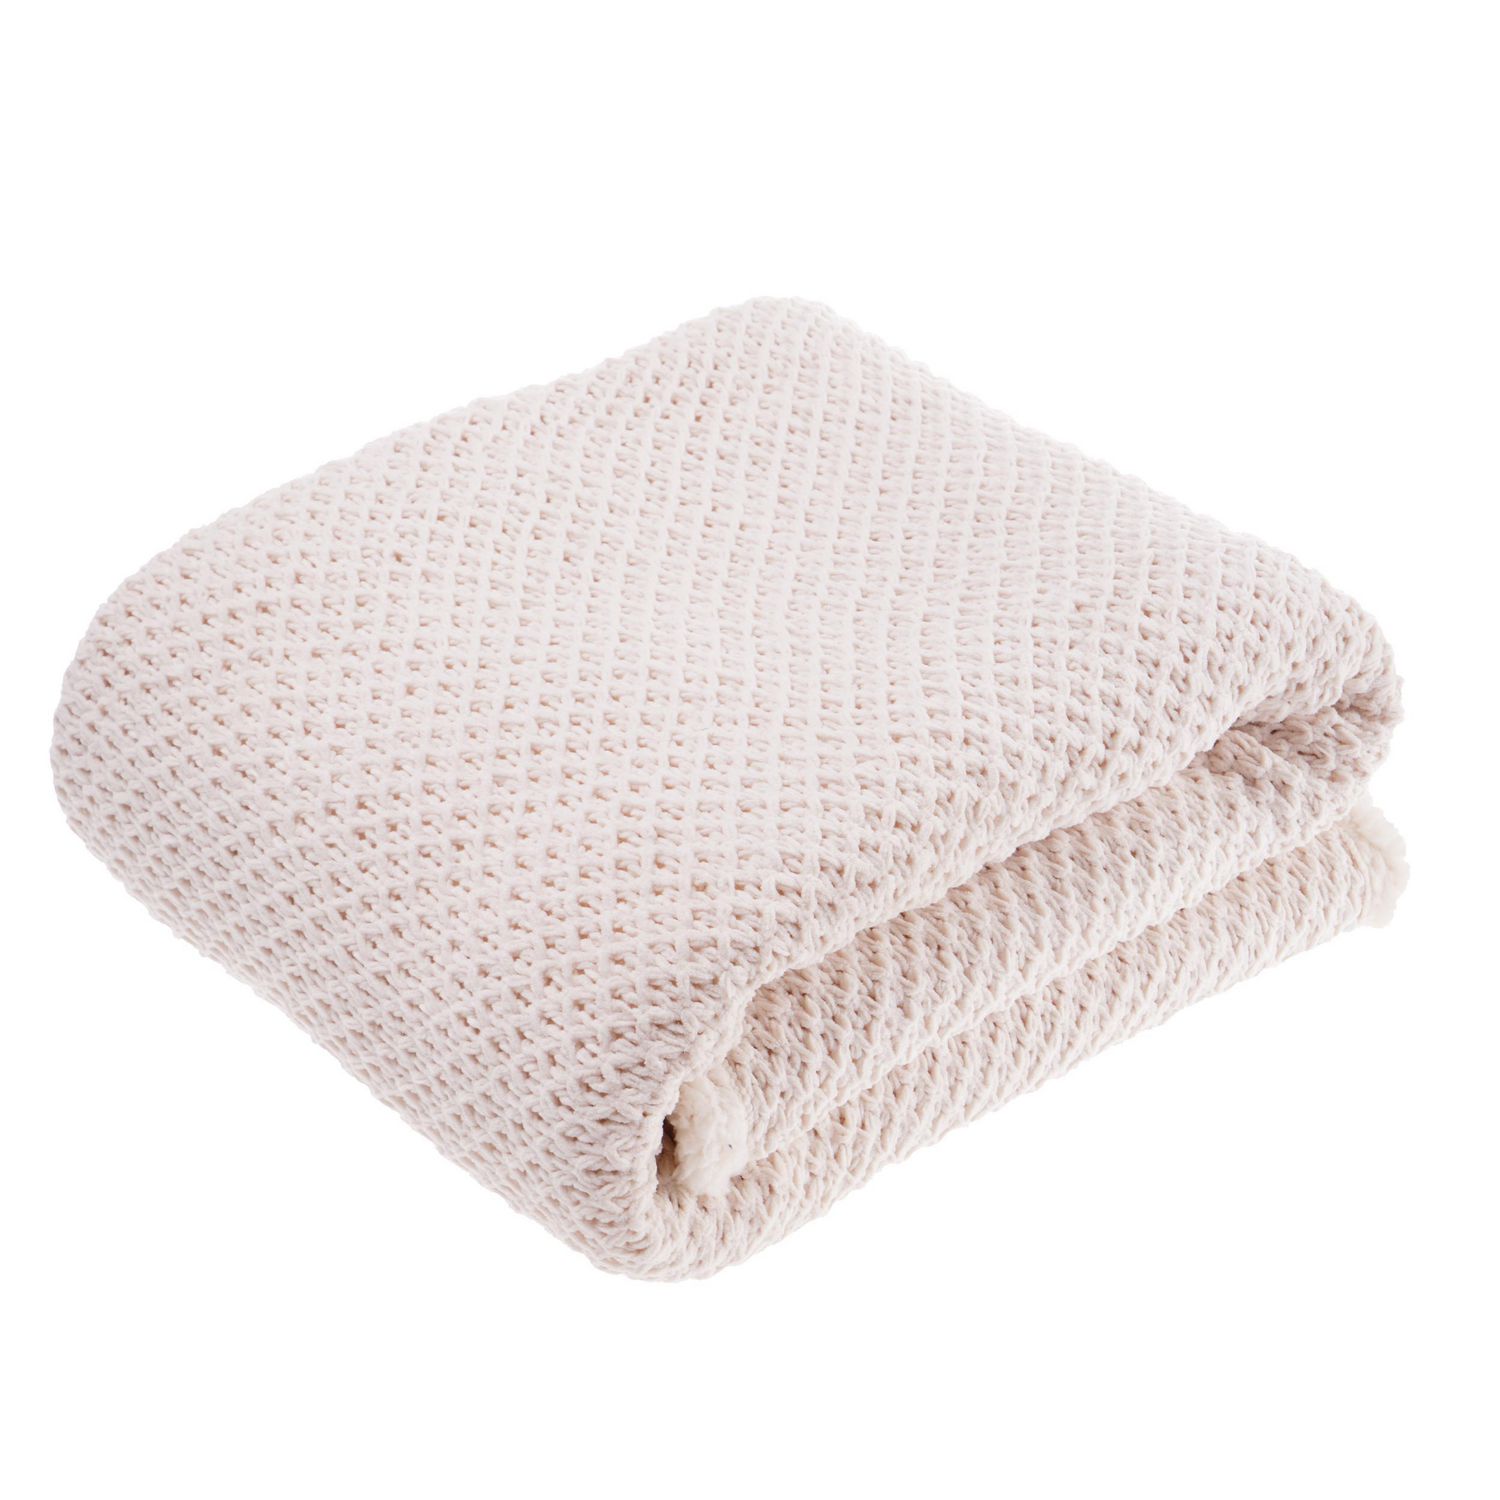 White Sherpa-Lined Knit Throw Blanket | Walmart Canada